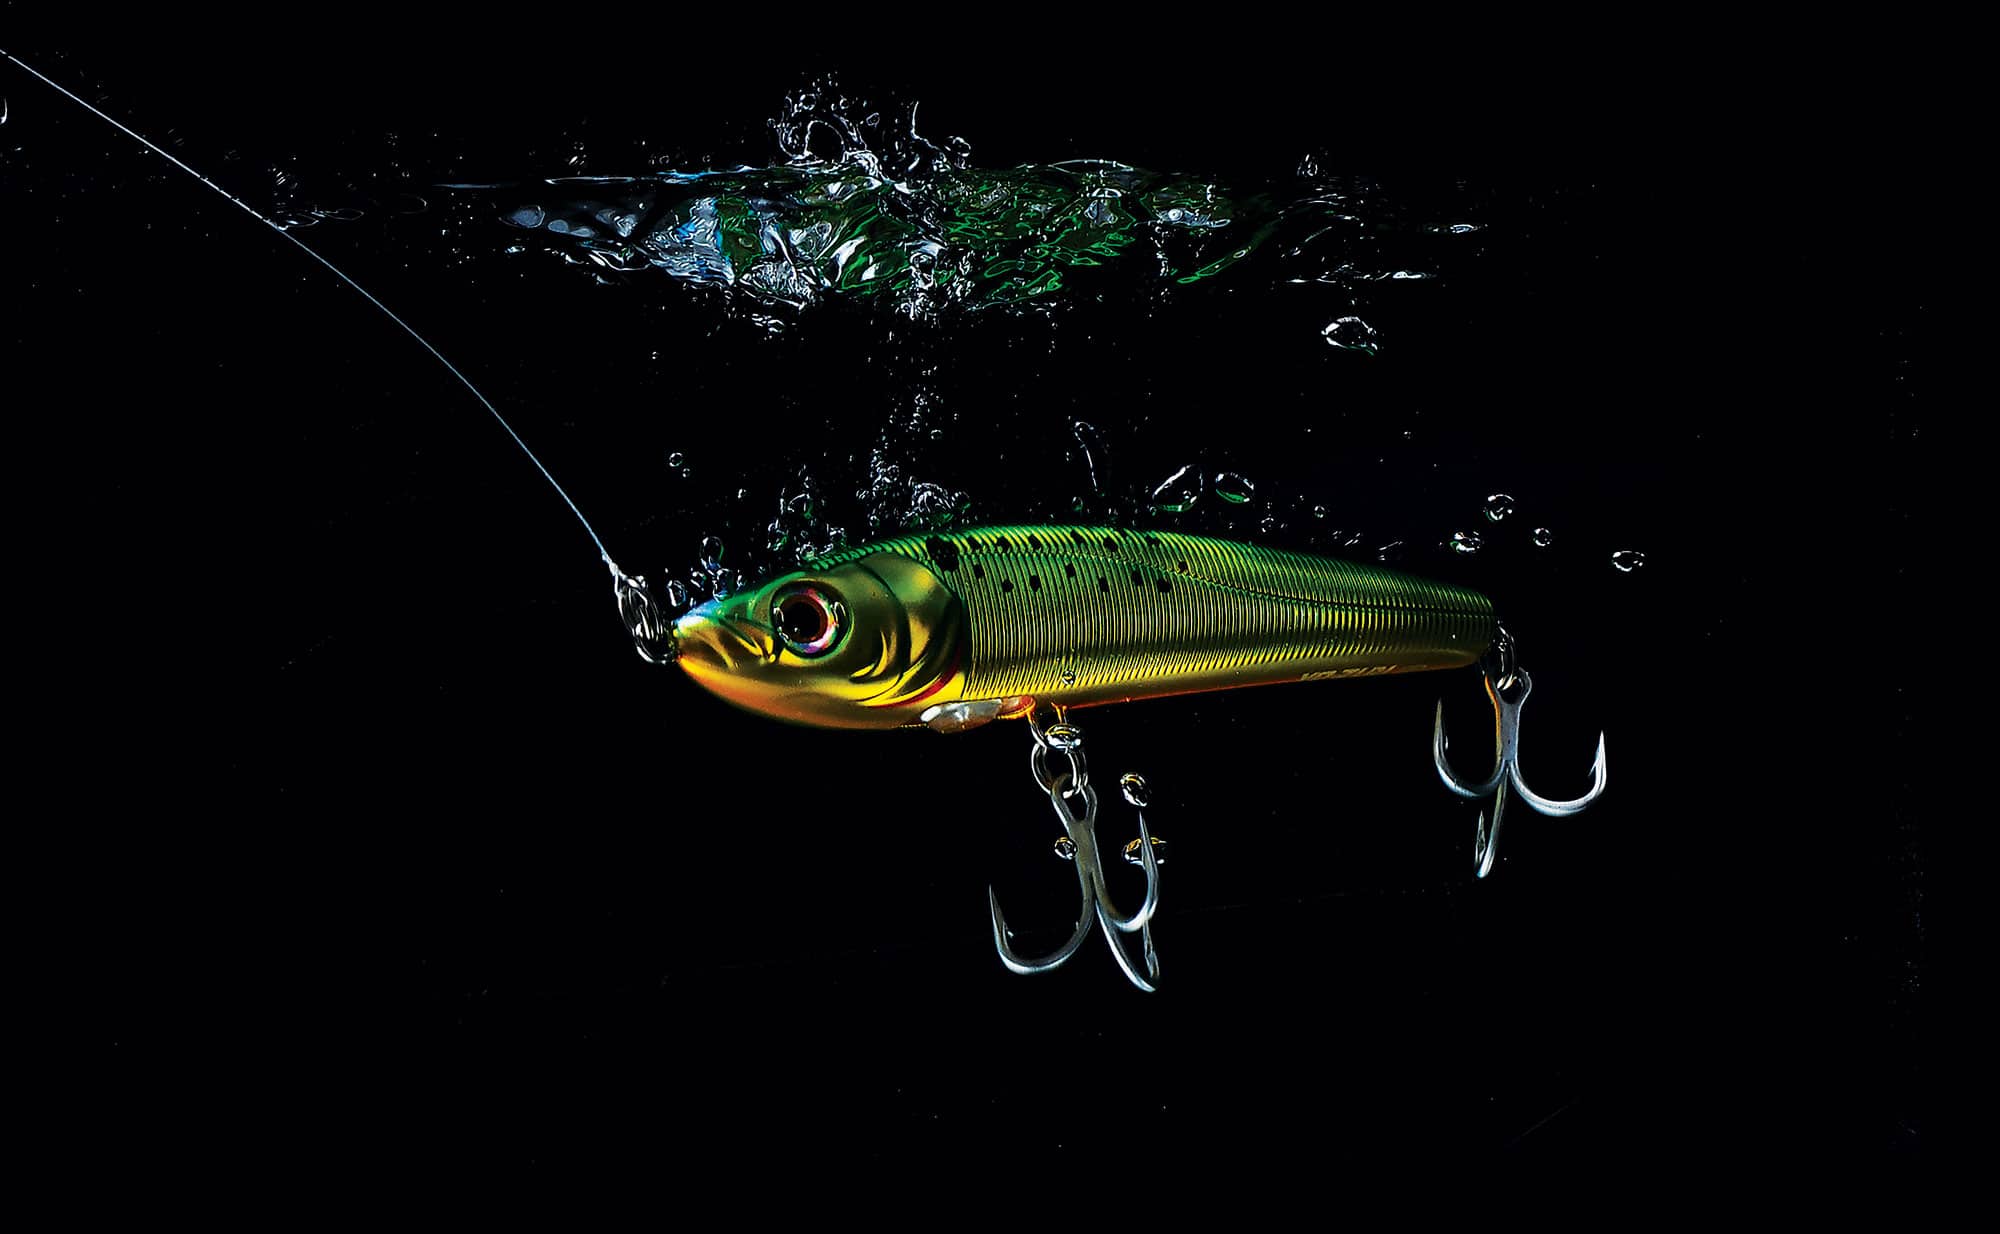 Catch More Fish with These Proven Lure Tips